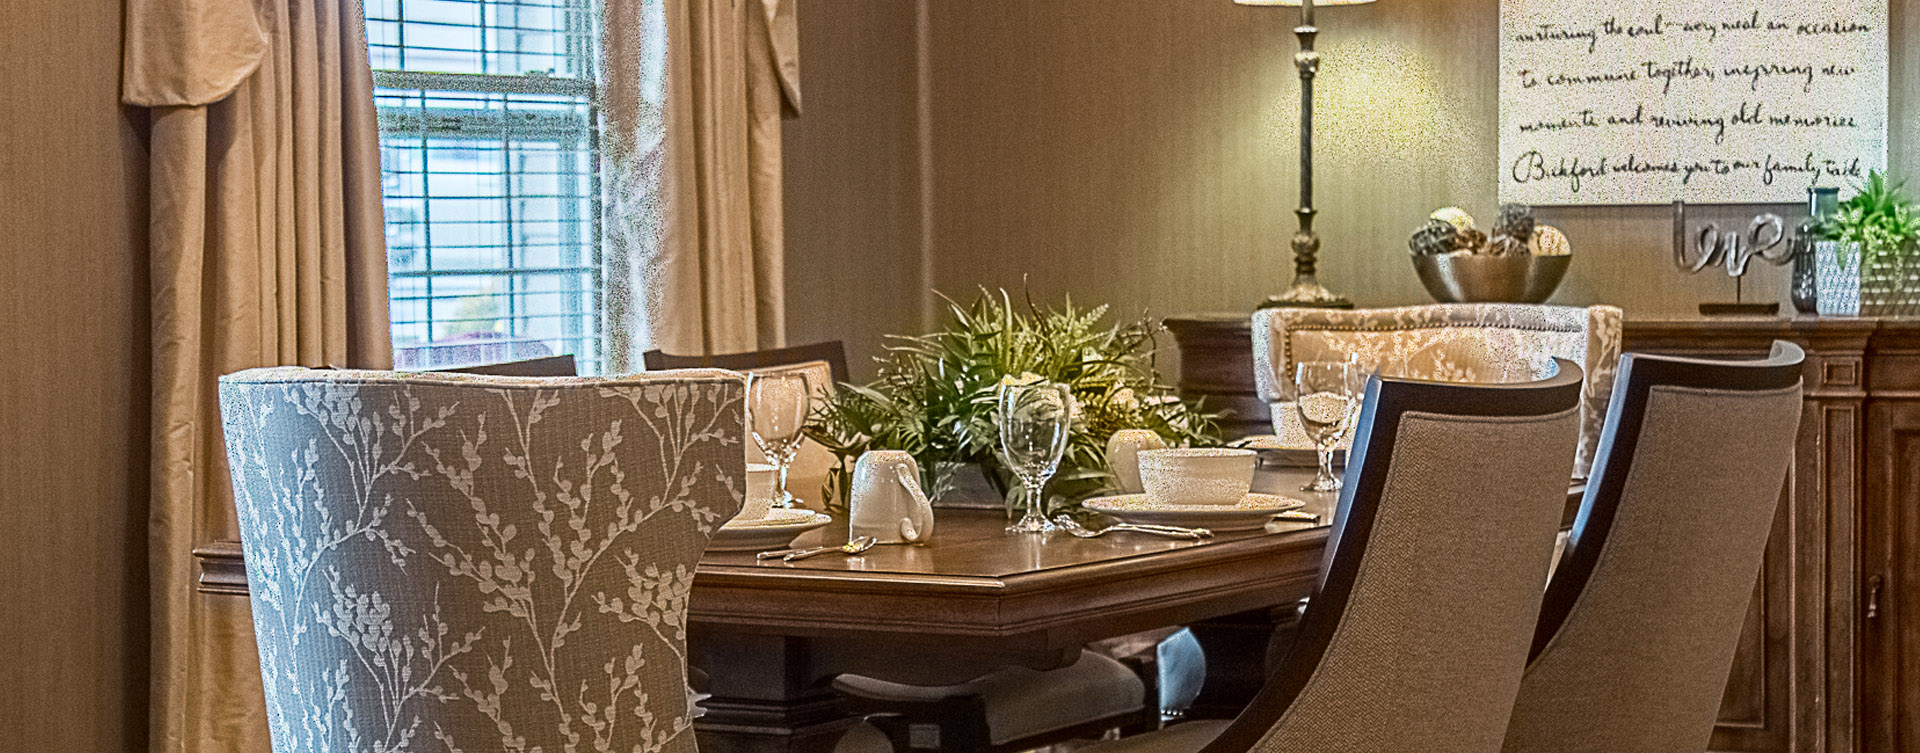 Celebrate special occasions in the private dining room at Bickford of Davenport